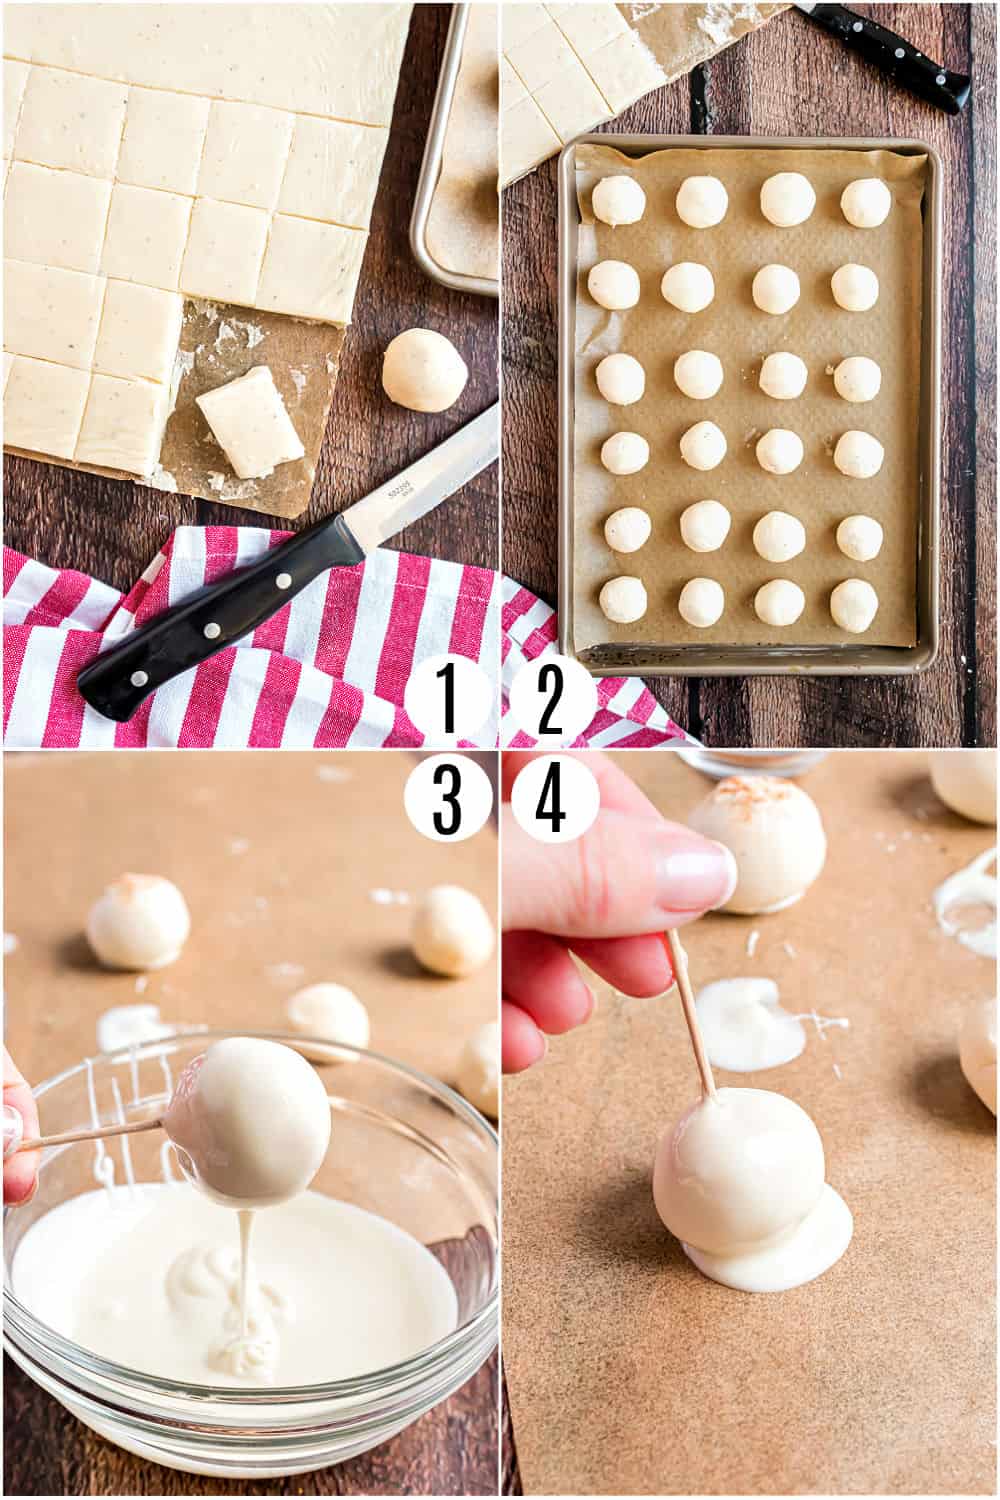 Step by step photos showing how to make eggnog truffles dipped in white chocolate.